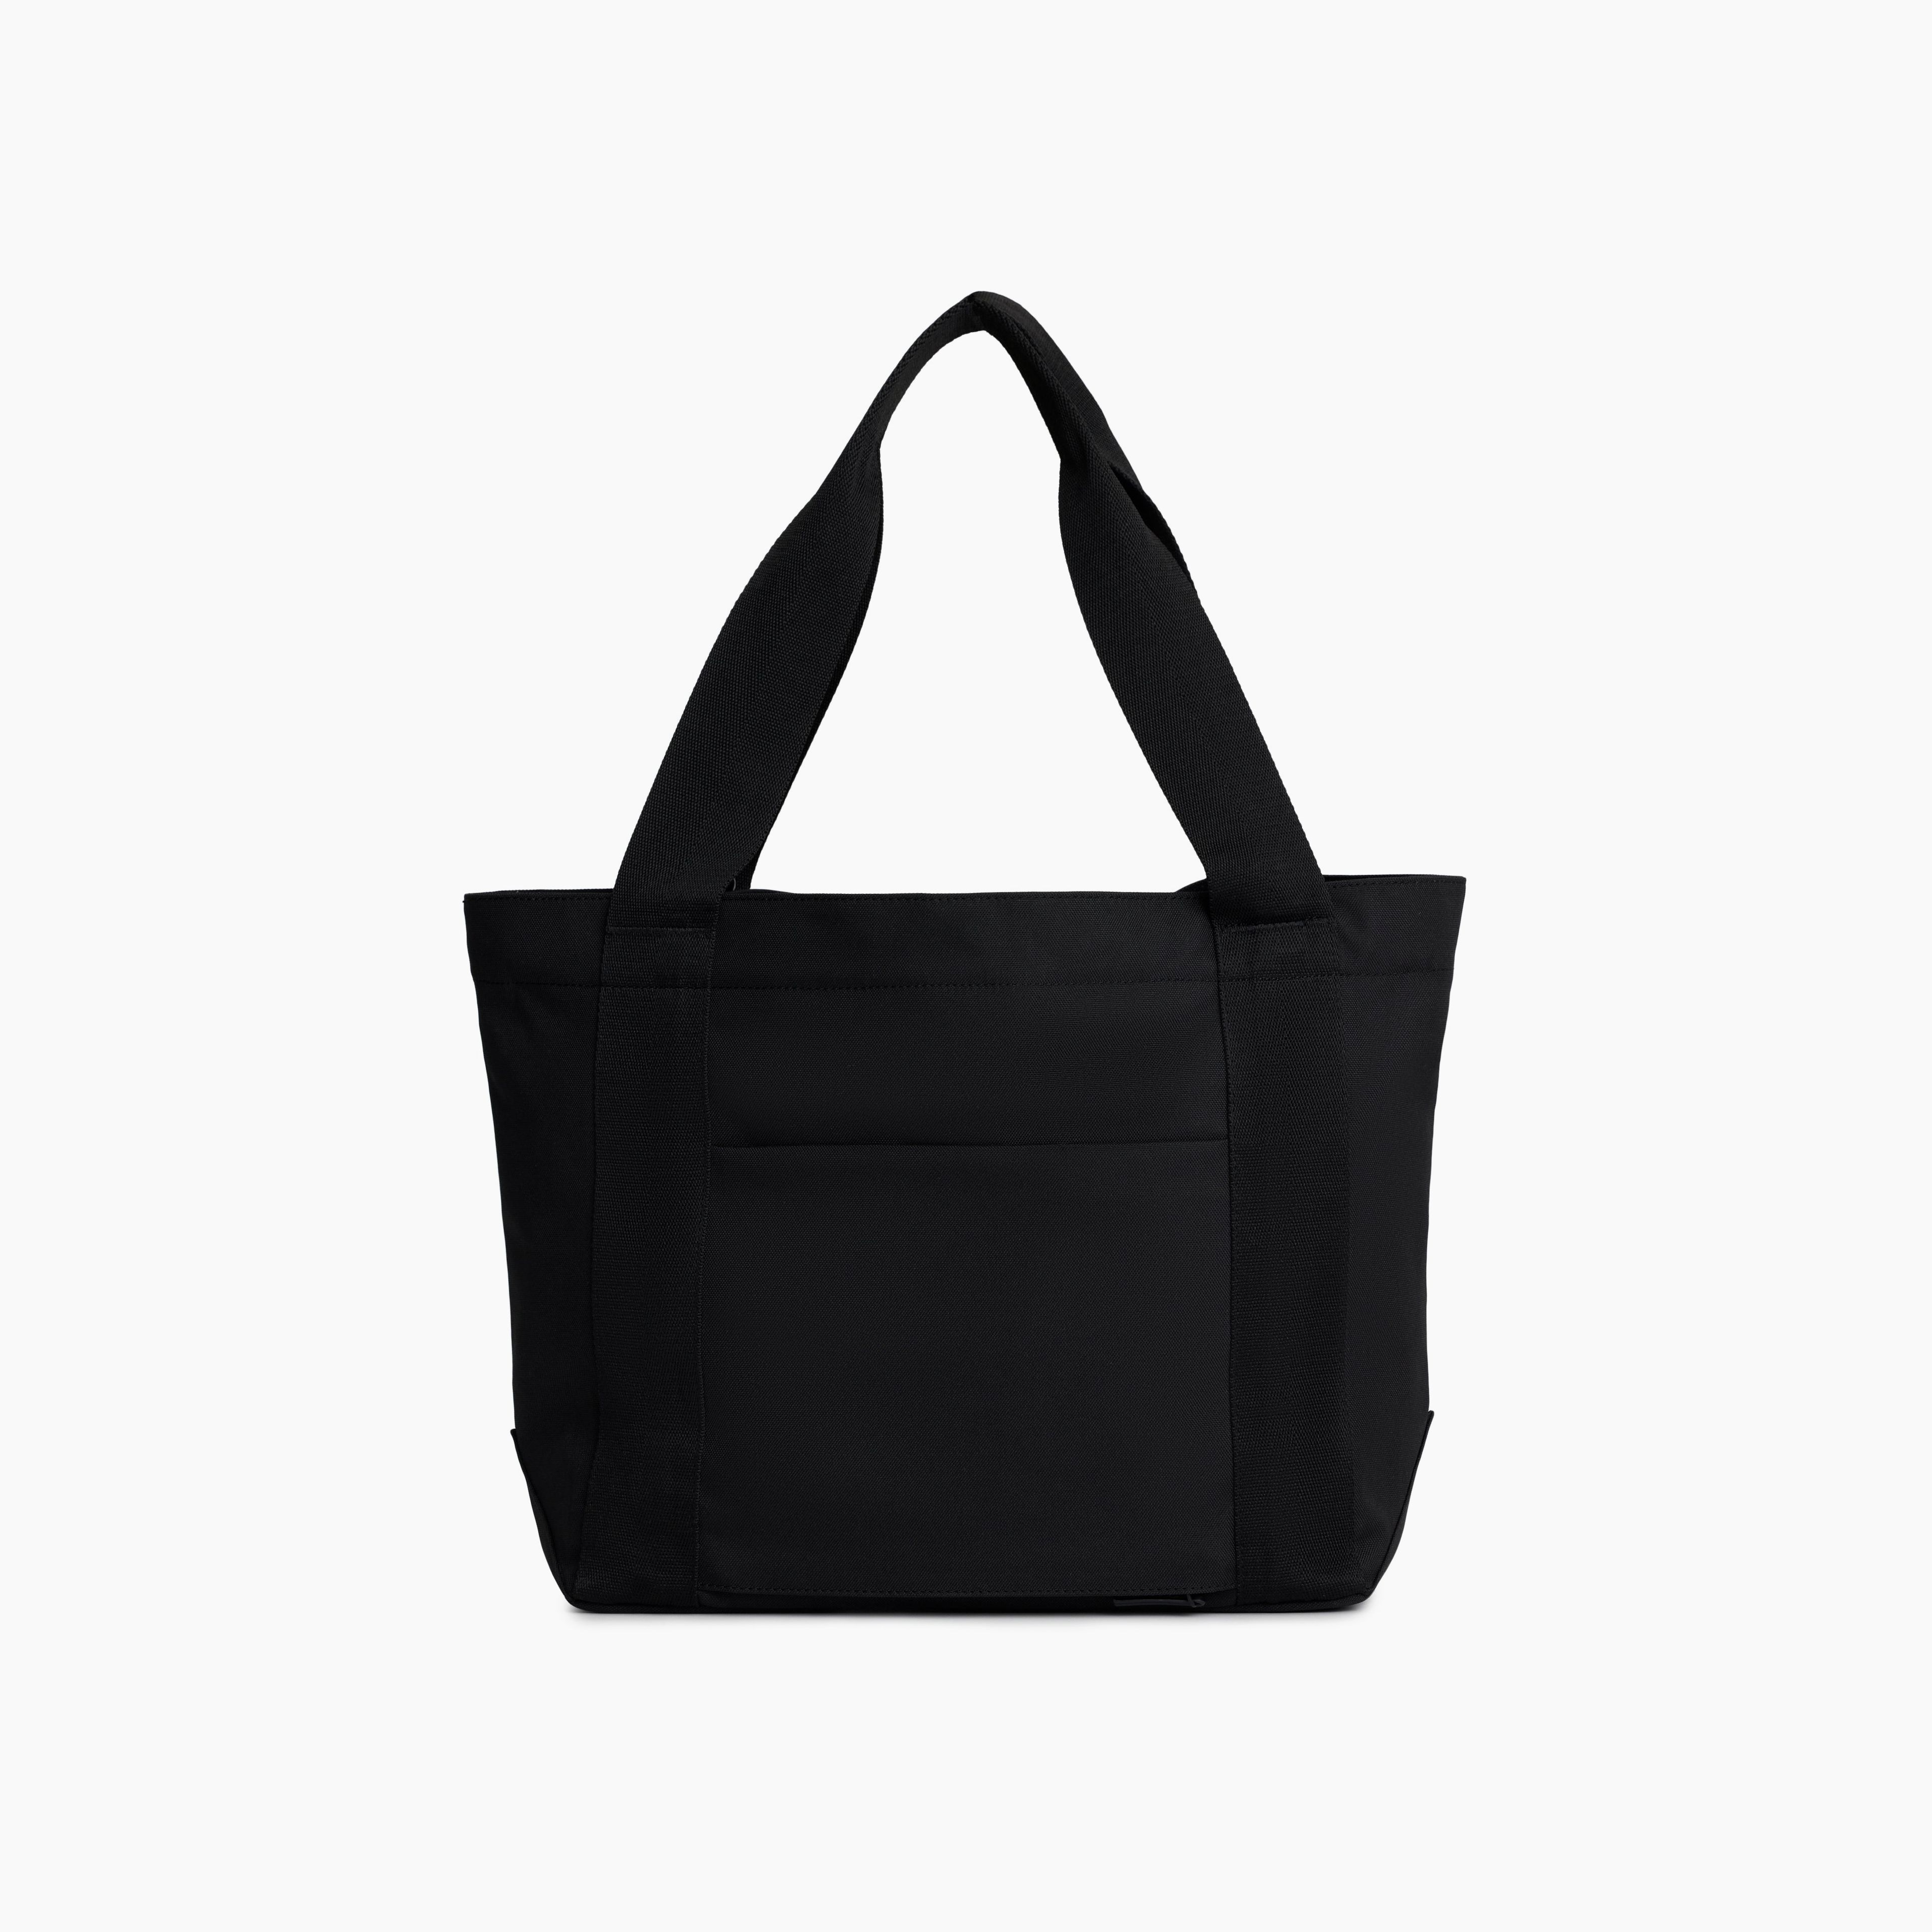 The BÉISics Tote in Black